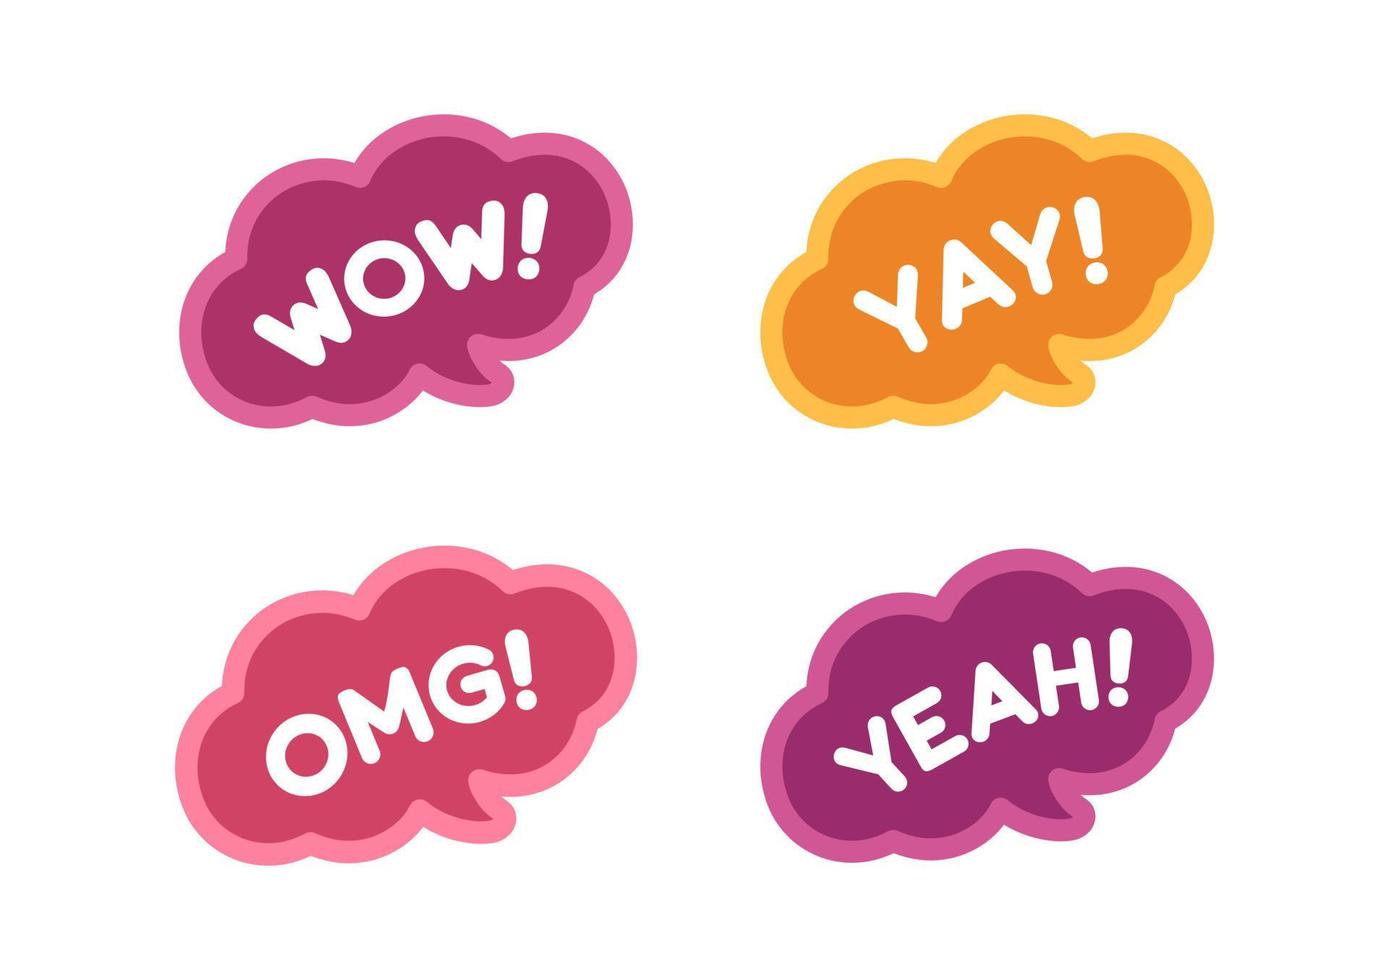 Cute speech bubble with short phrases yay, omg, wow, yeah, online messaging icon set. Simple flat vector illustration.